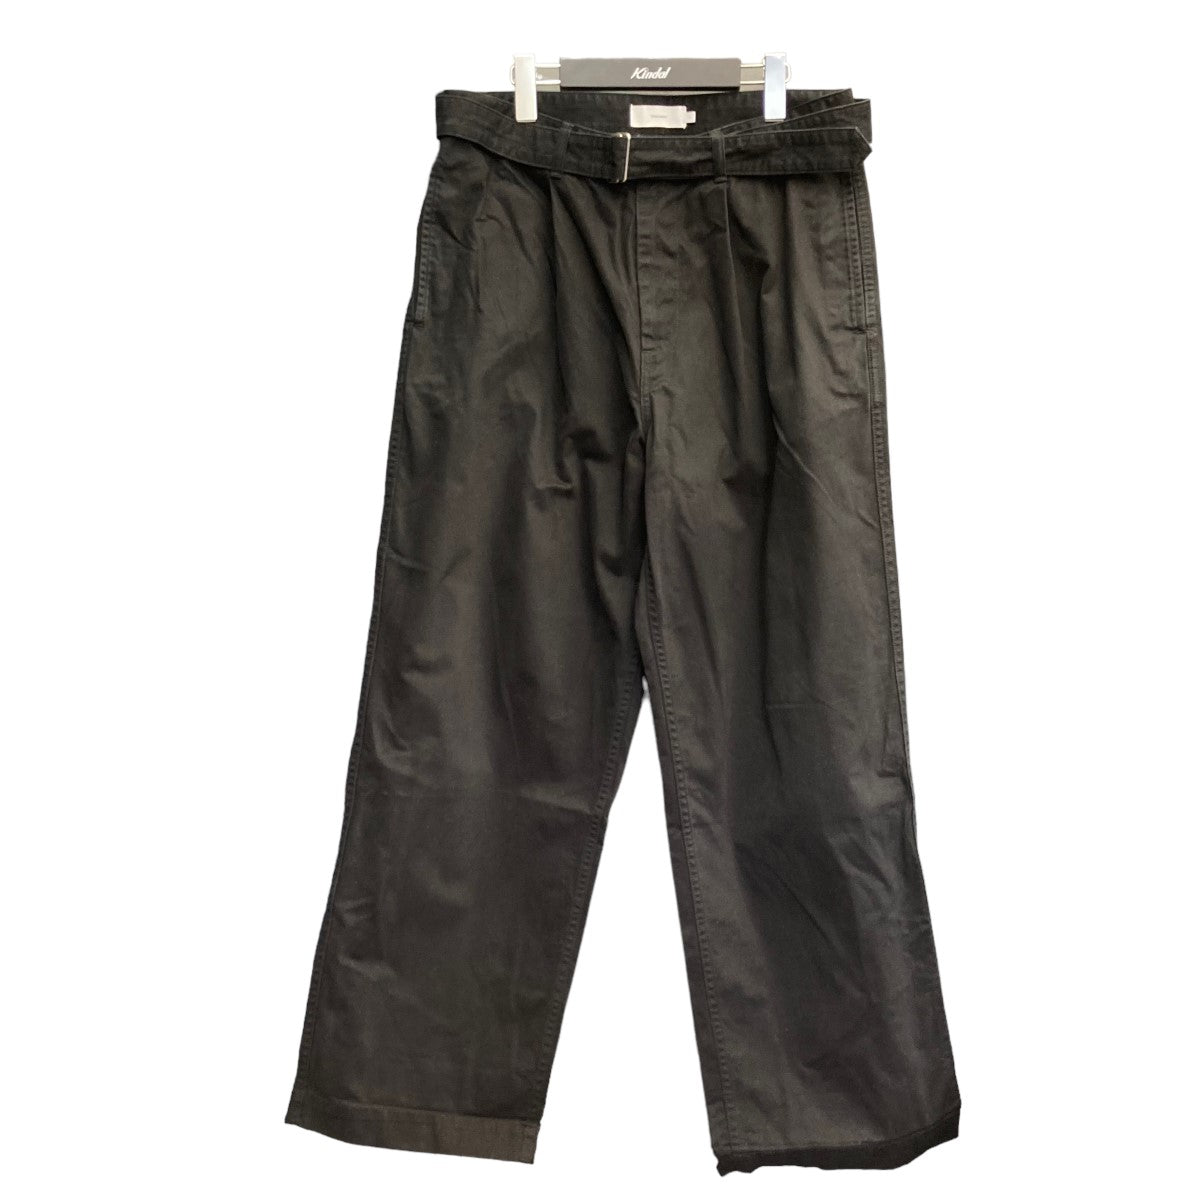 Graphpaper(グラフペーパー) 「Military Cloth Belted Pants」 ミリタリークロスパンツ